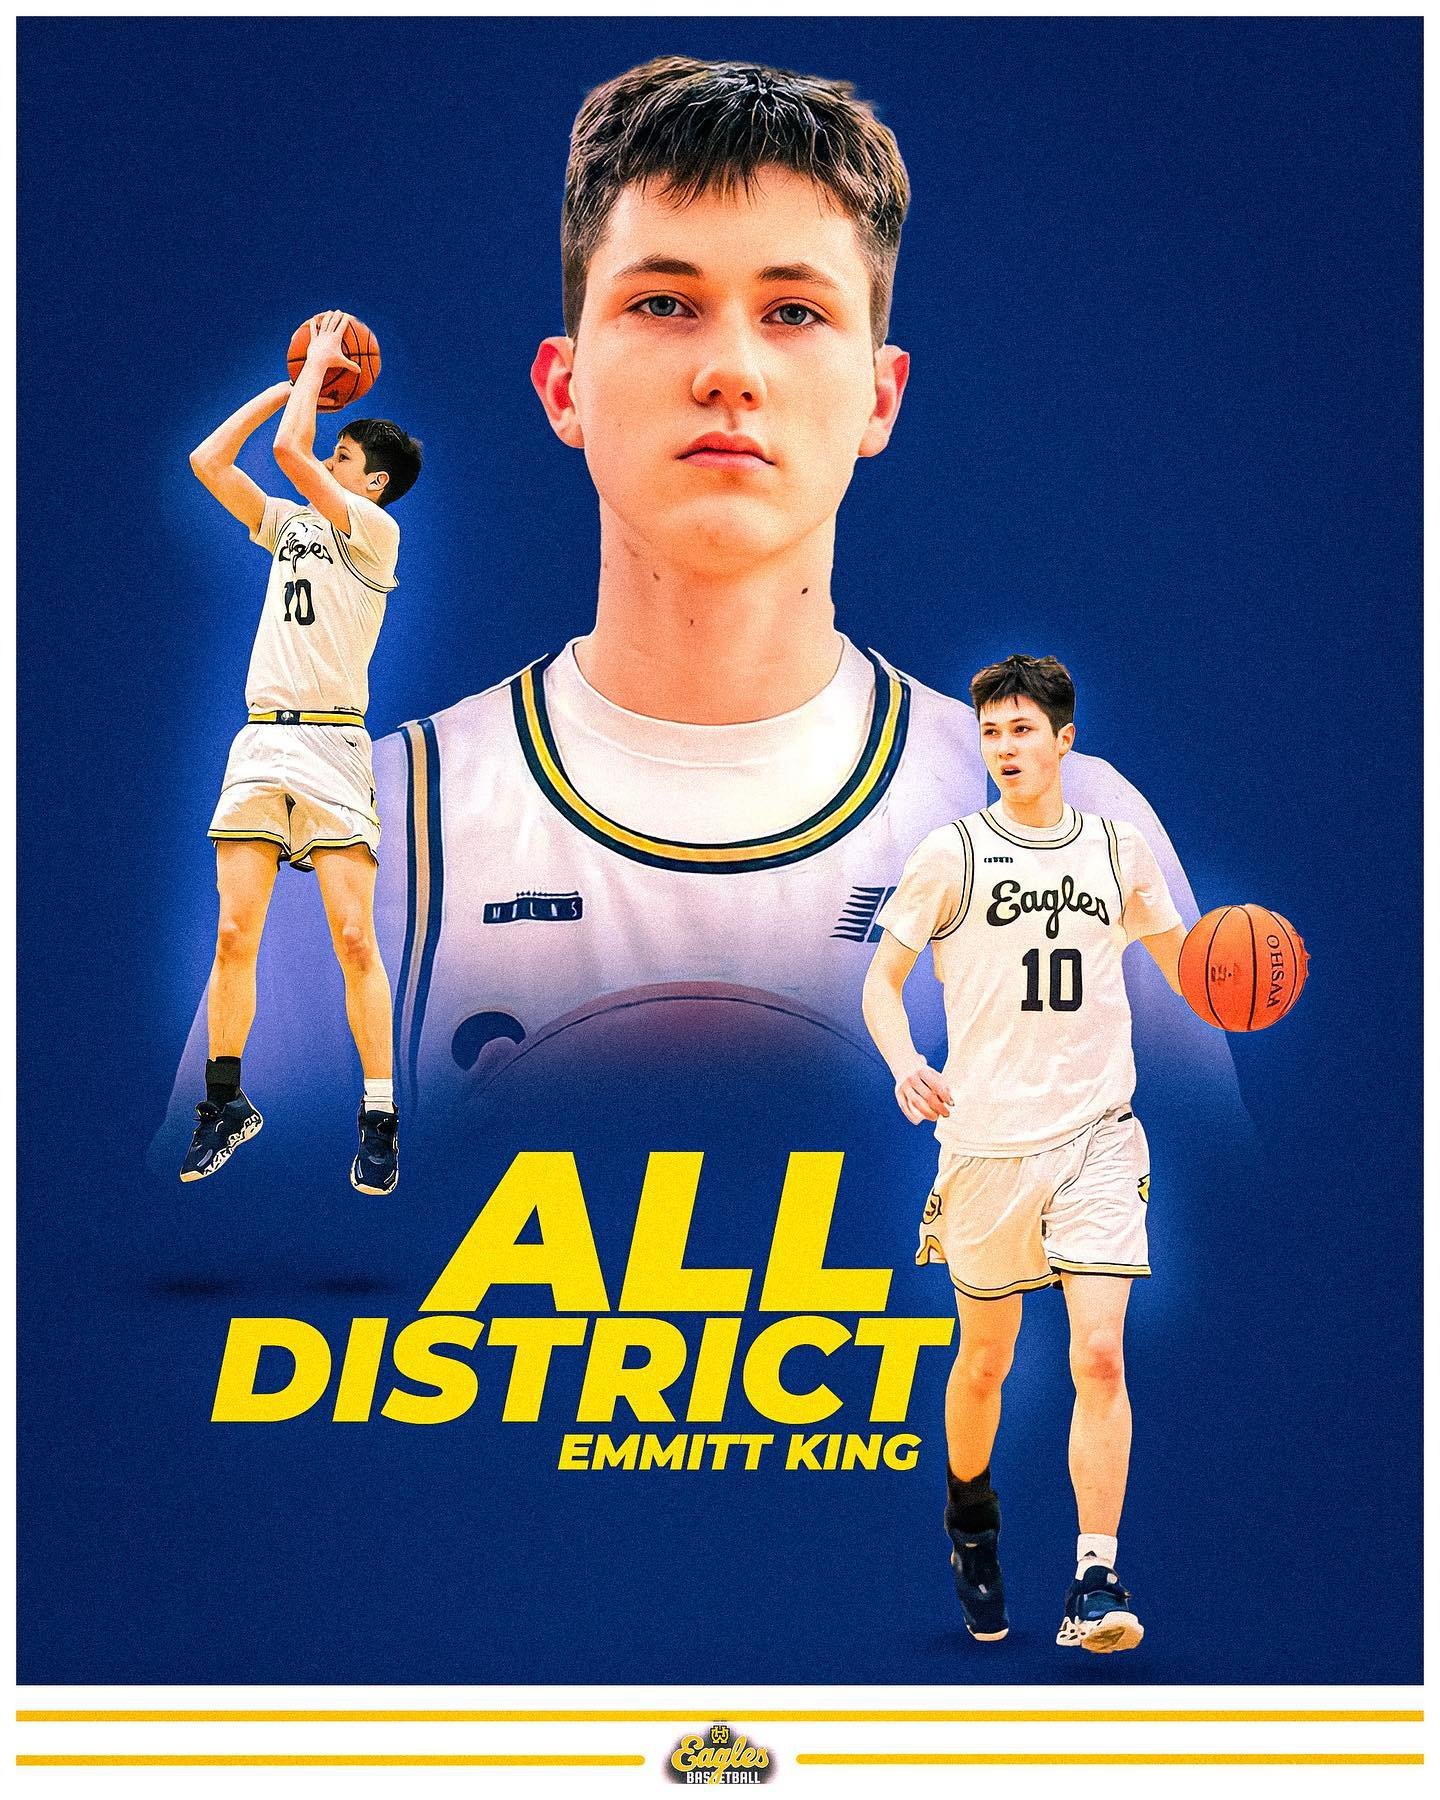 Congrats to two of our seniors for making All District. Well deserved. #WingsUp🦅